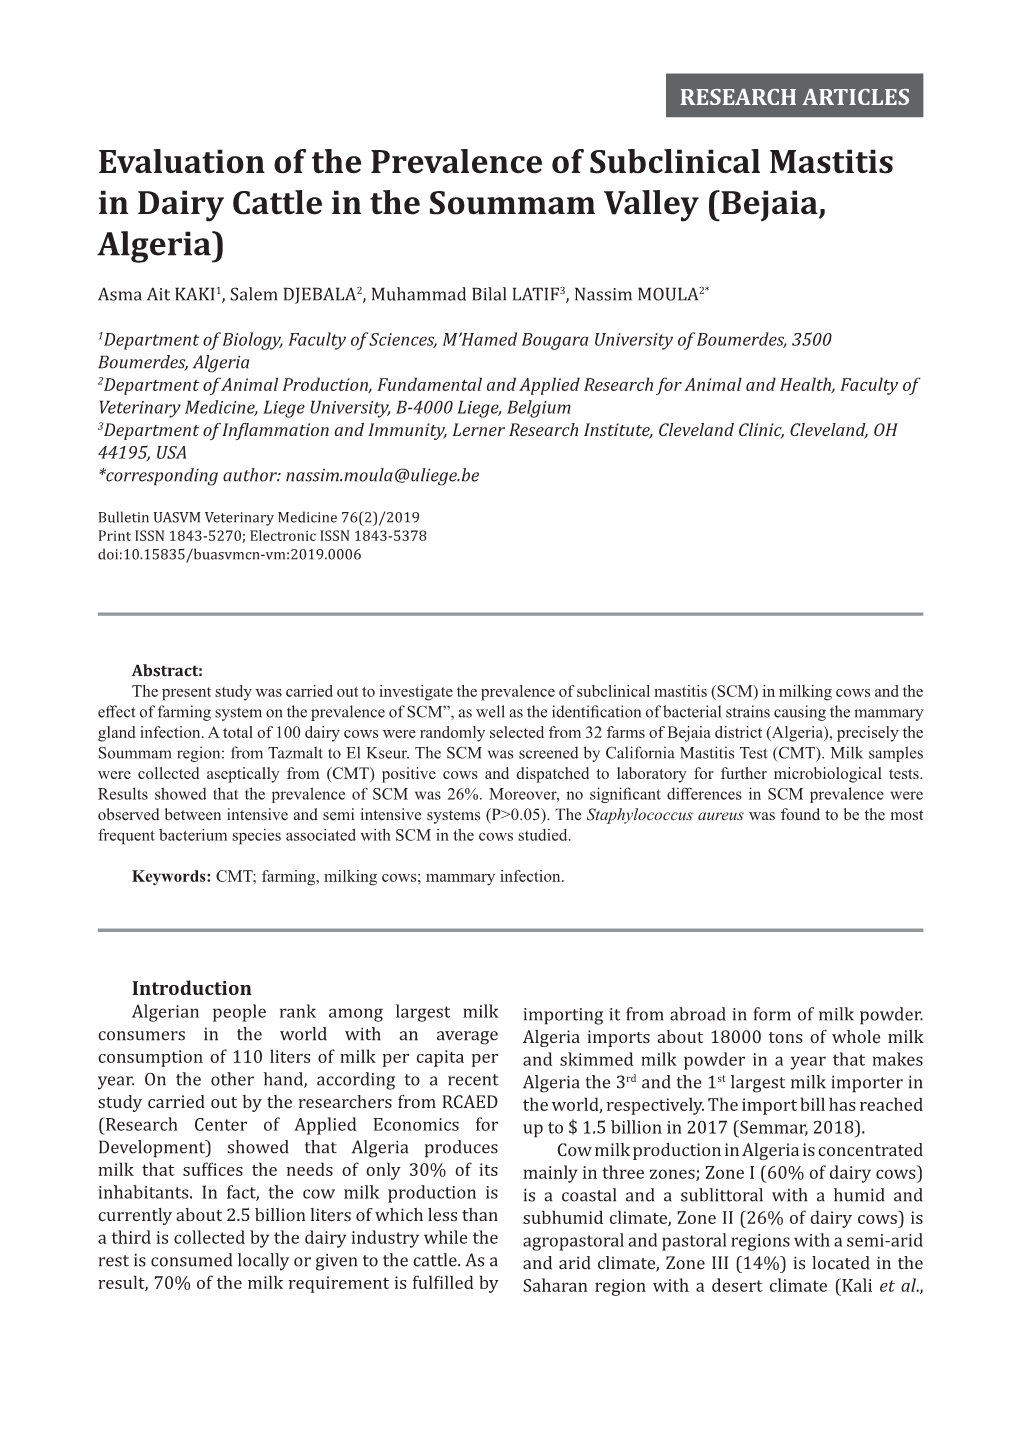 Evaluation of the Prevalence of Subclinical Mastitis in Dairy Cattle in the Soummam Valley (Bejaia, Algeria)